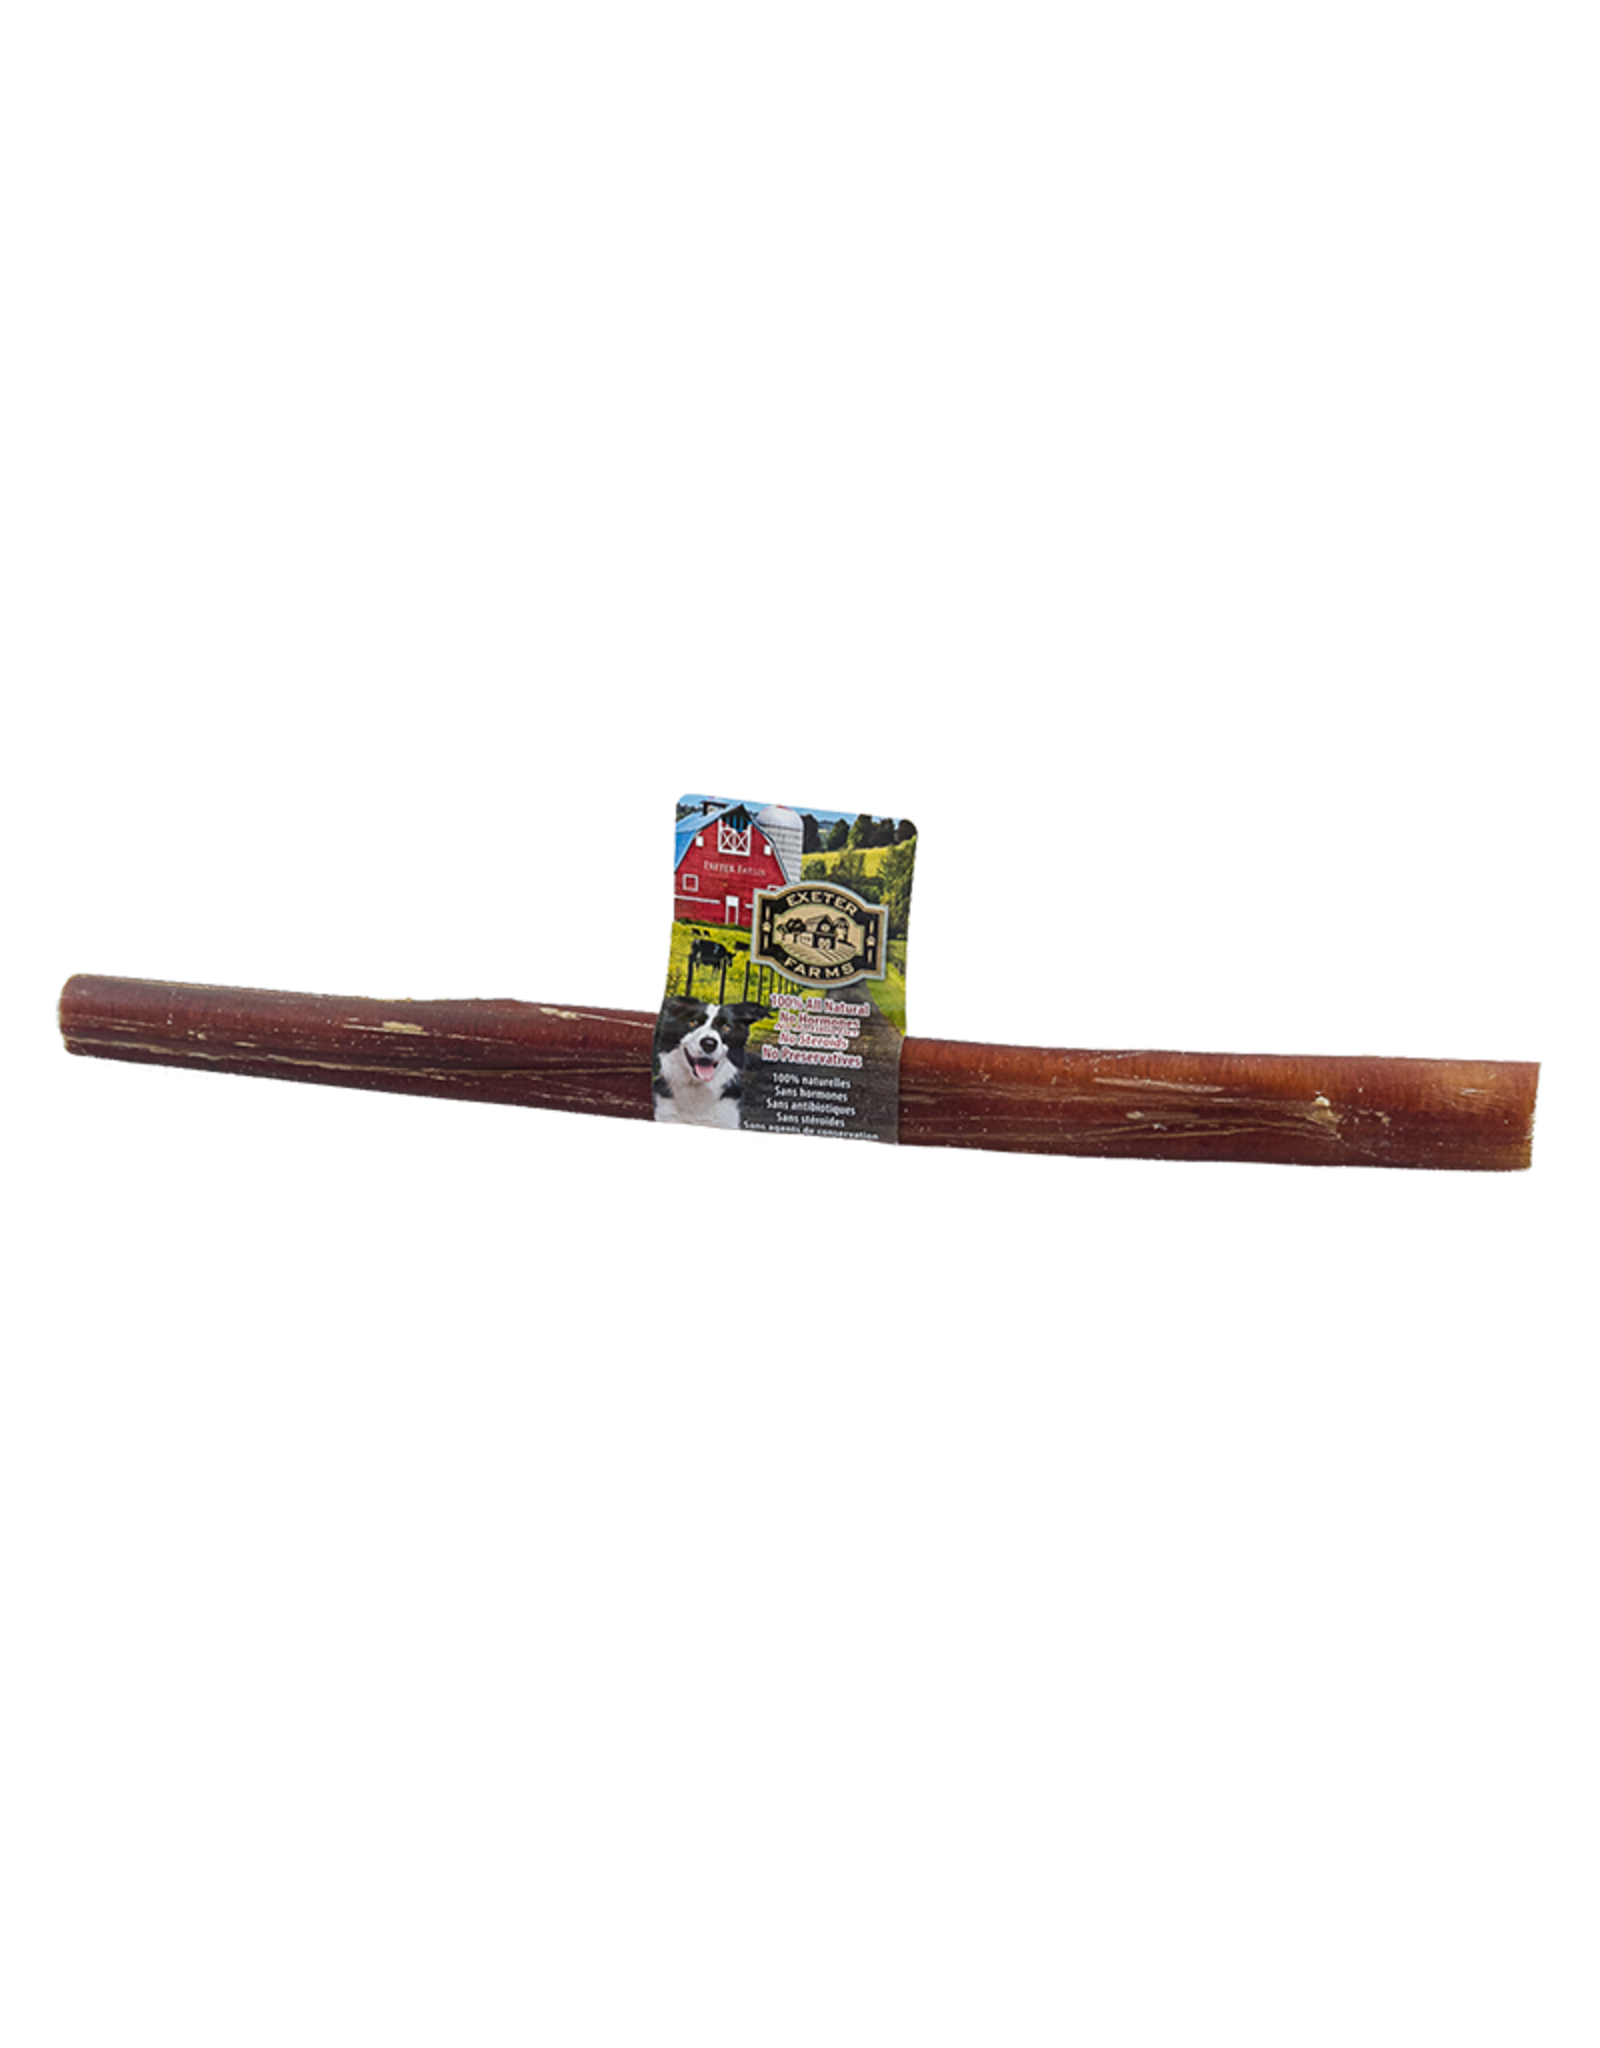 EXETER EXETER FARMS 11-12" BULLY STICK SUPREME